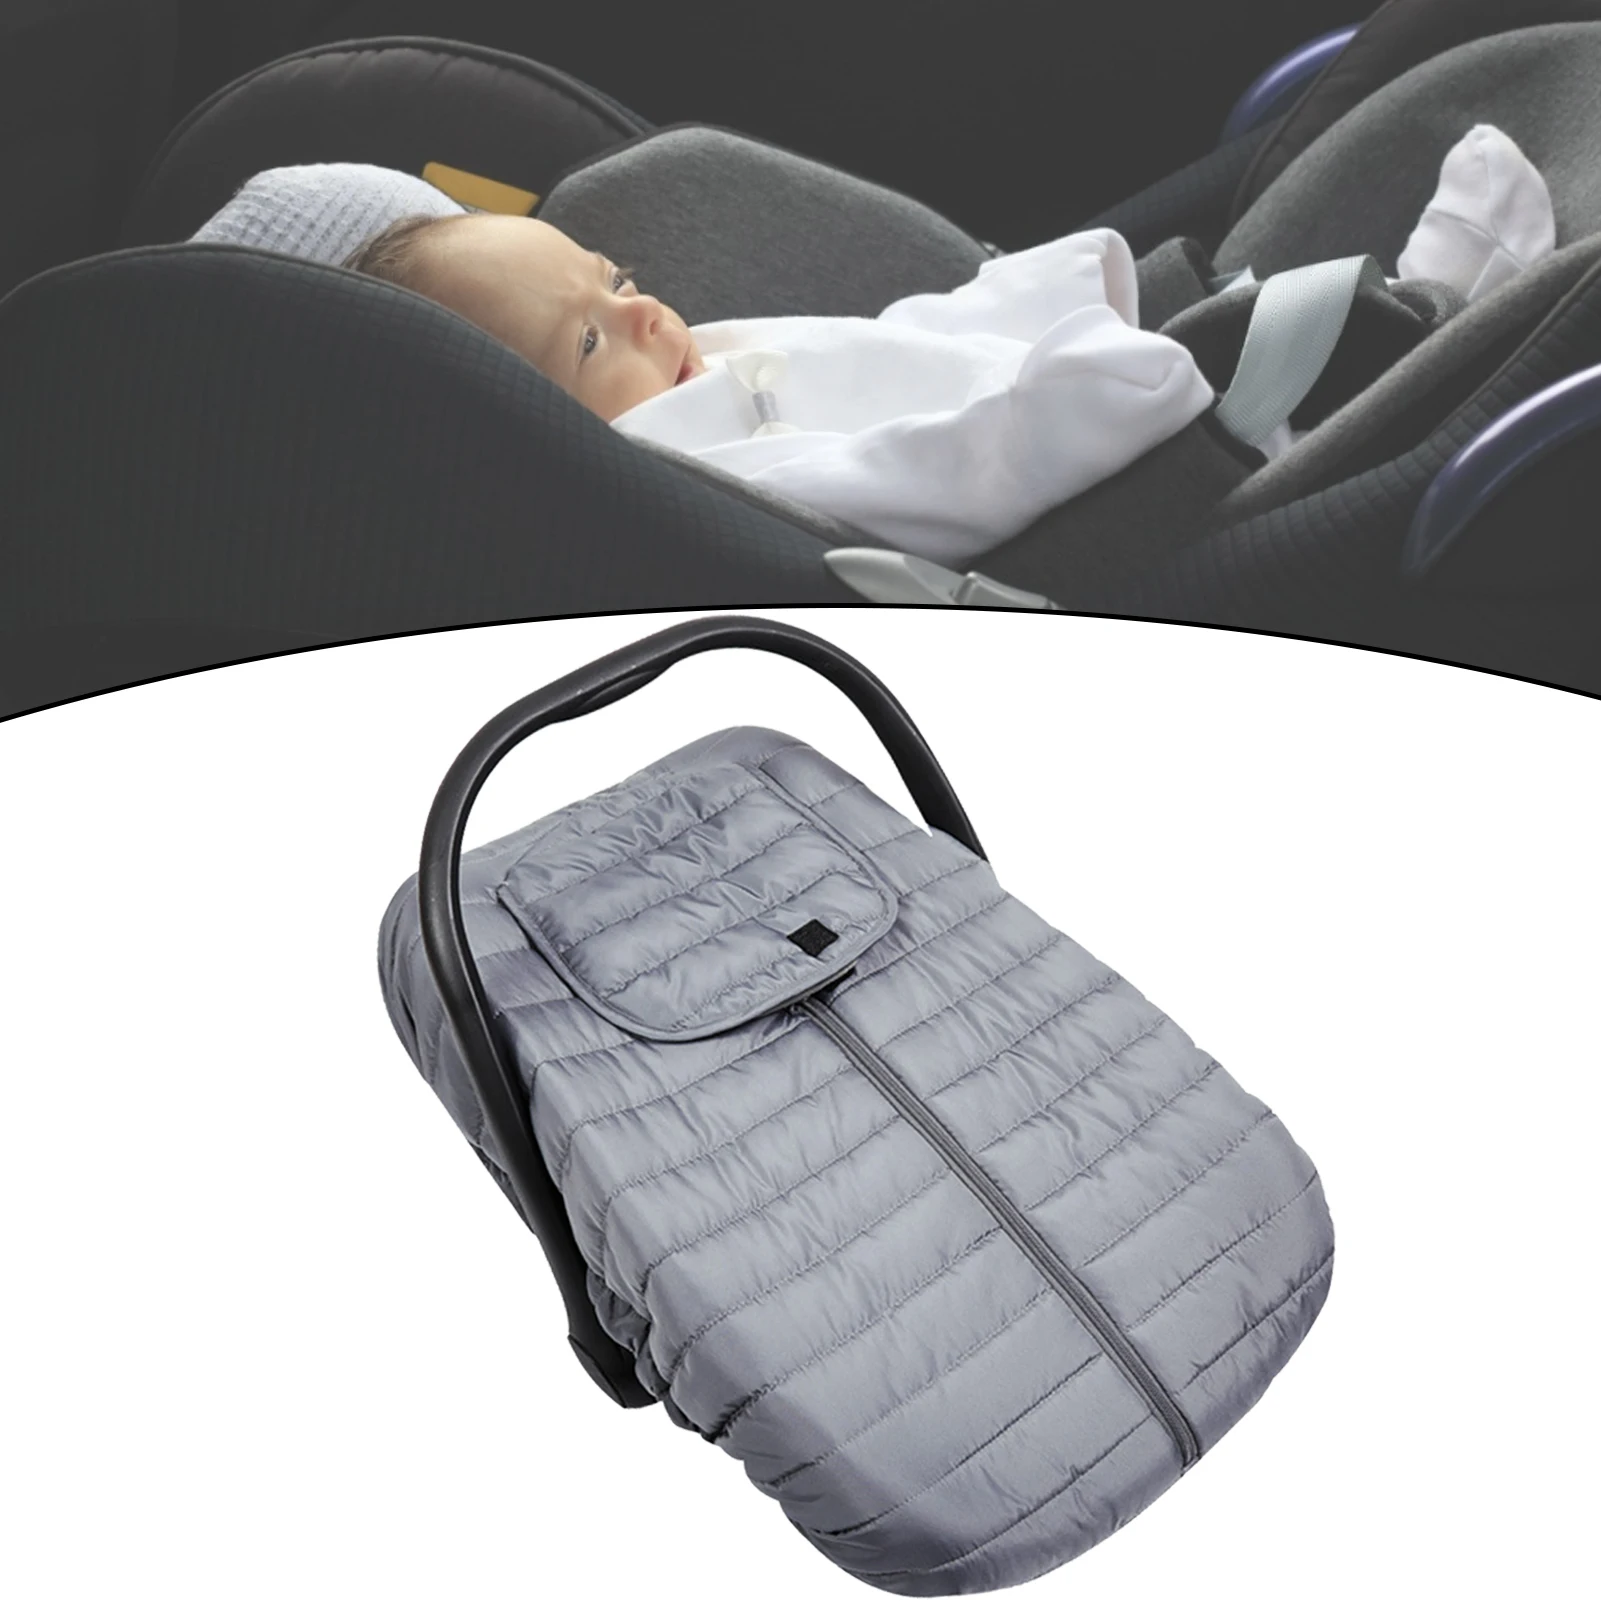 

Newborn Windproof Cradle Cover Autumn And Winter Multifunctional Cradle Cover Is Waterproof, Dirt-resistant And Easy to Clean